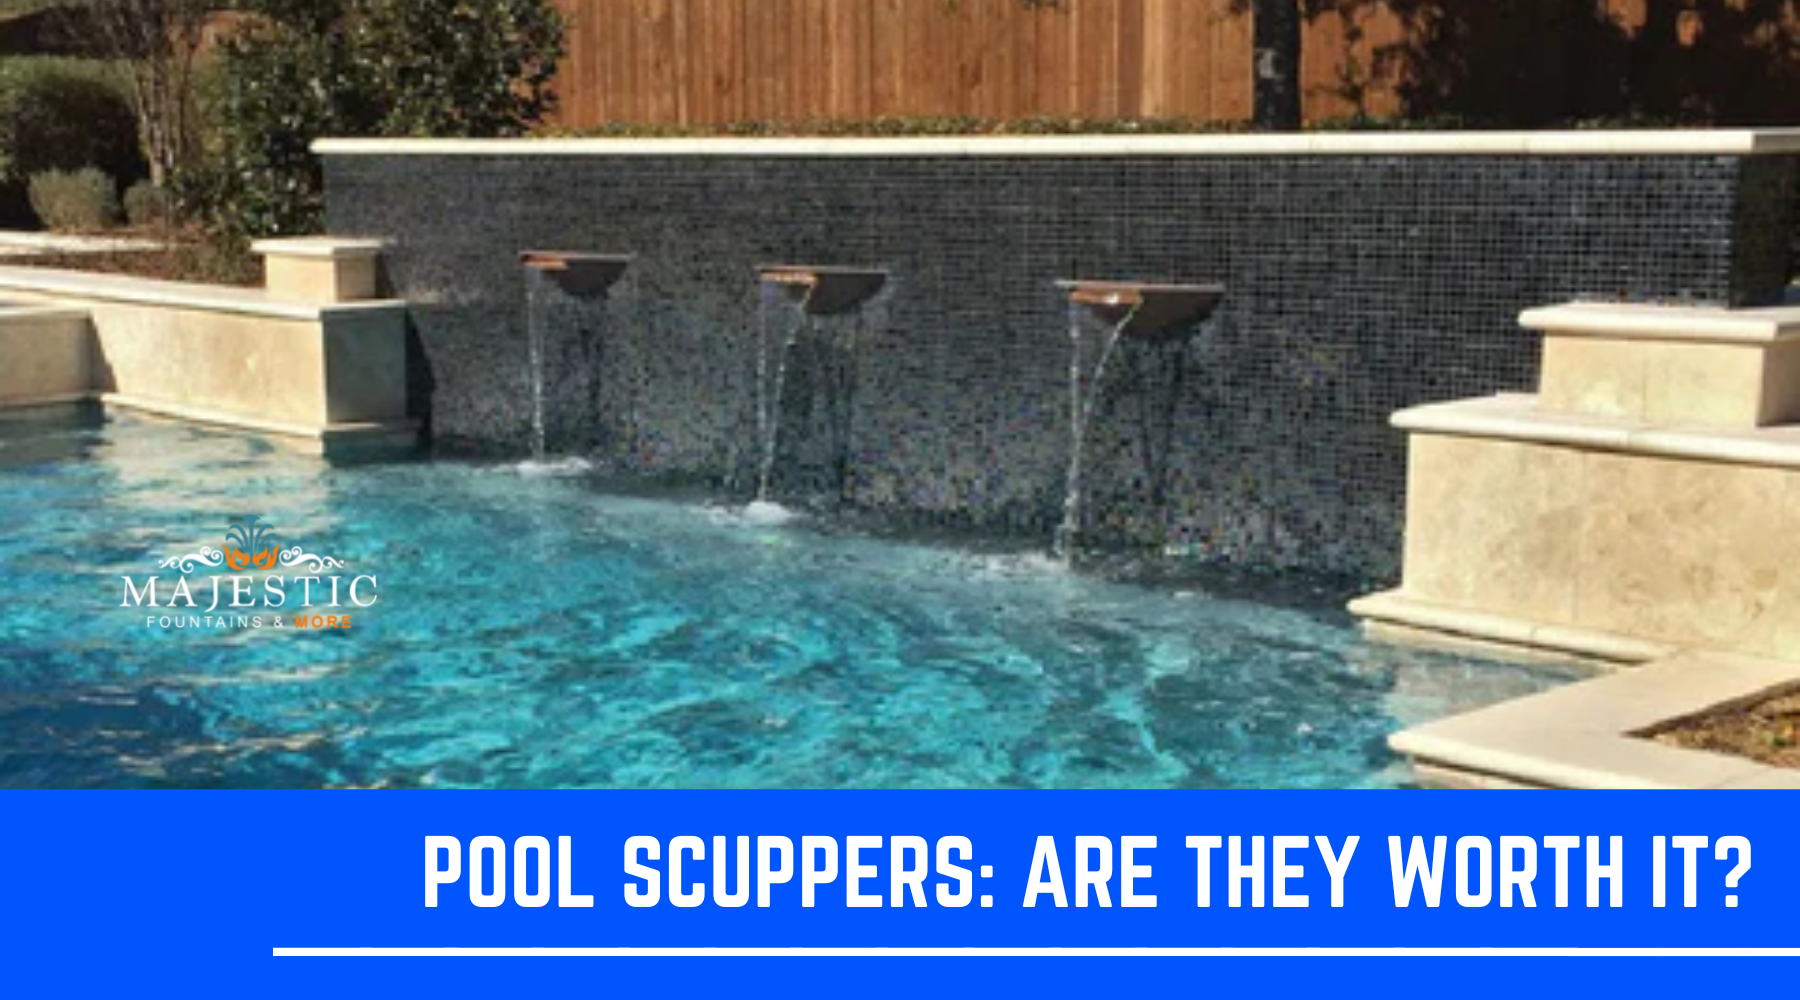 Pool Scuppers Are They Worth It